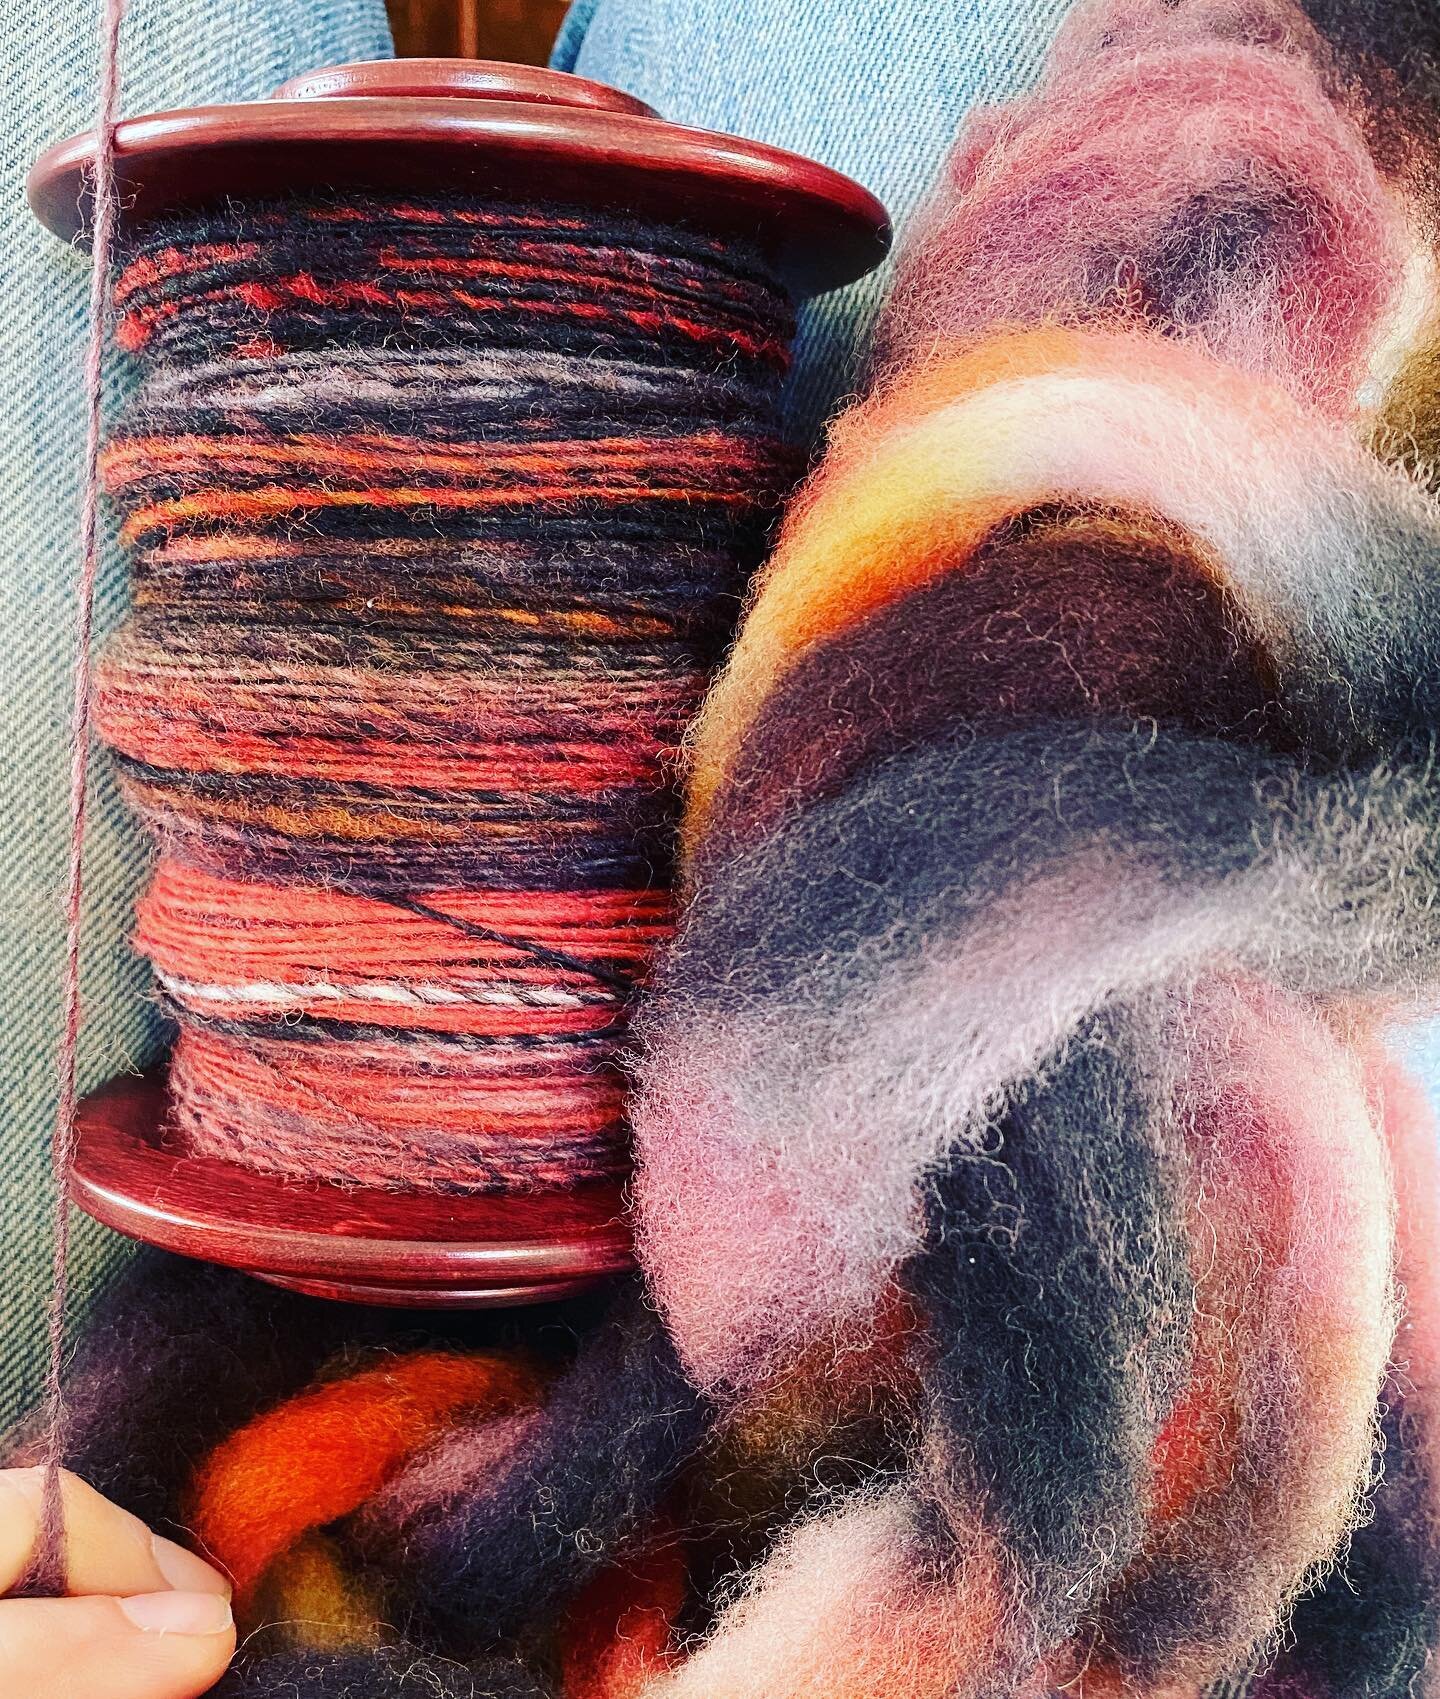 Clun forest wool is one of my favorites to spin. This beauty is from @left.hand.wool  Should I ply this with some black alpaca or with itself? 

#decisions #clunforestsheep #handspinnersofinstagram #handspinning #color #nashvillemade #kromski #slowar